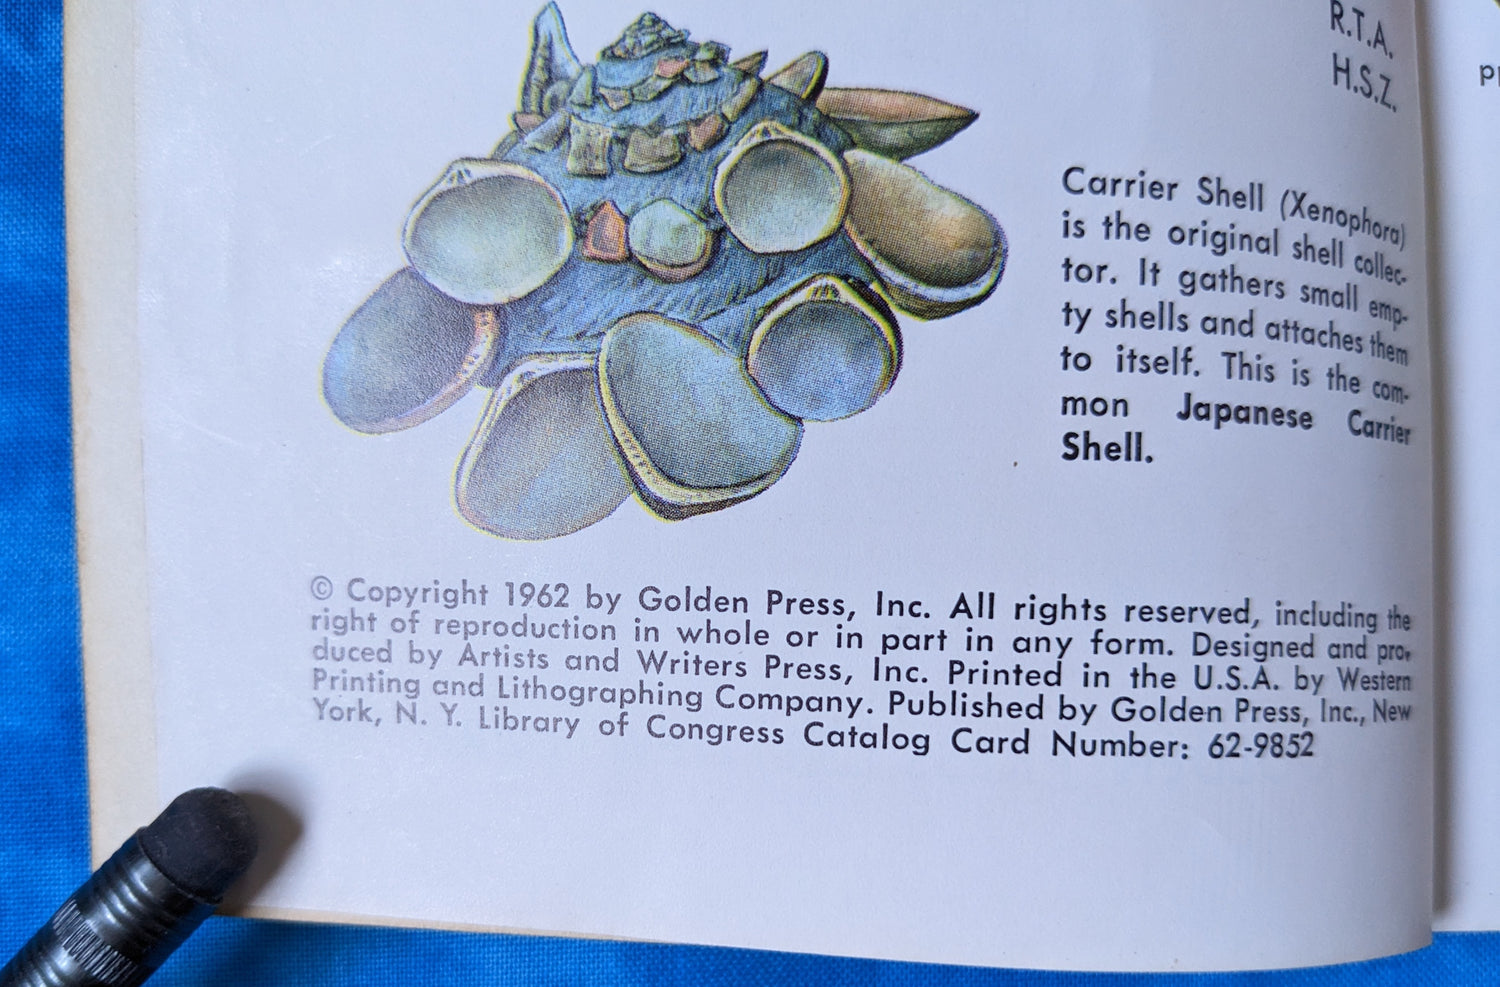 Sea Shells of the World vintage book publishing notes